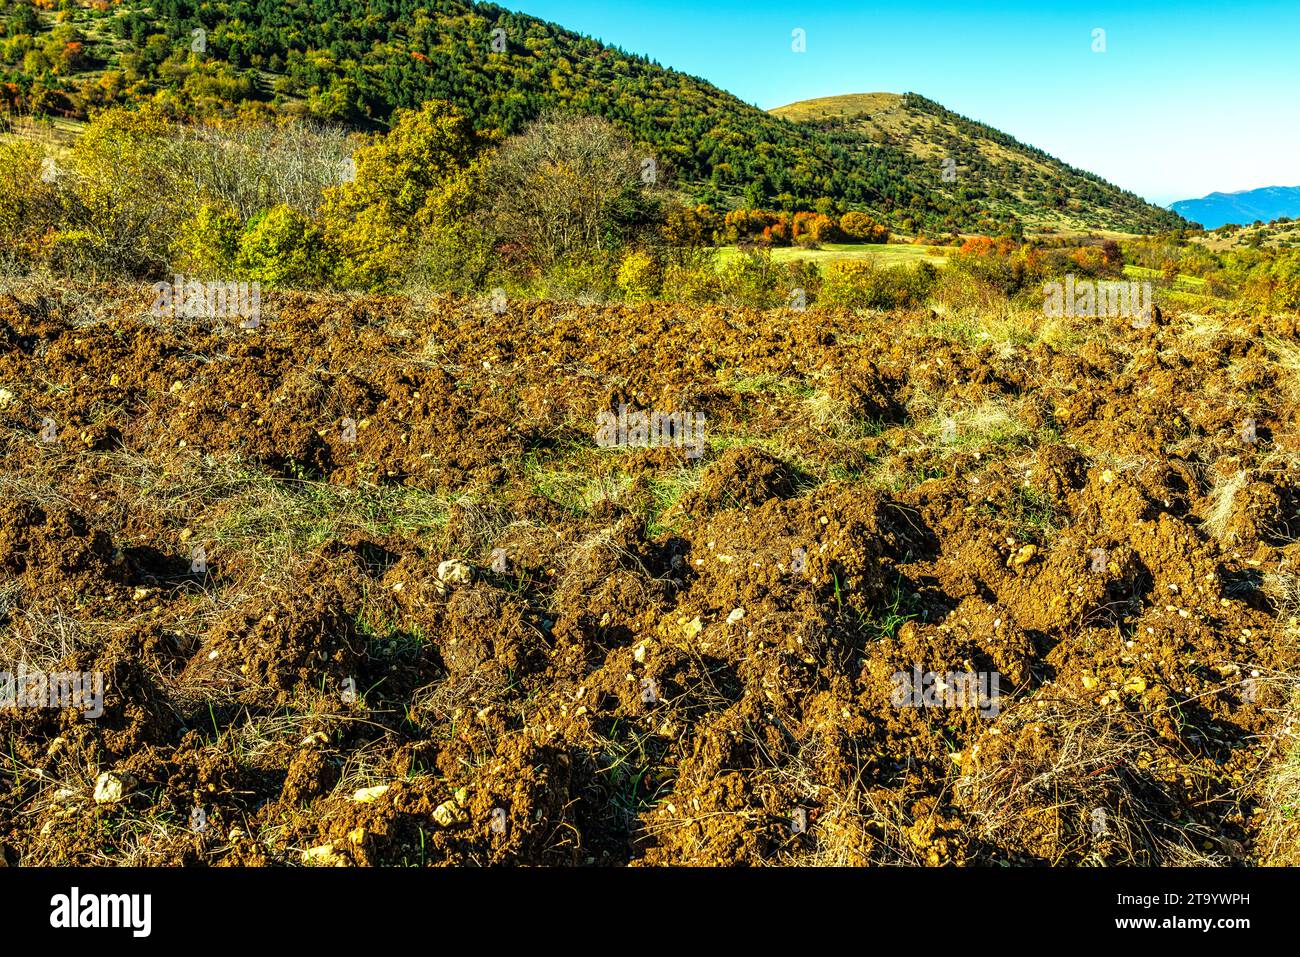 breaking and plowing agricultural land in the mountains to prepare for the winter period. Cansano, province of L'Aquila, Abruzzo, Italy Stock Photo